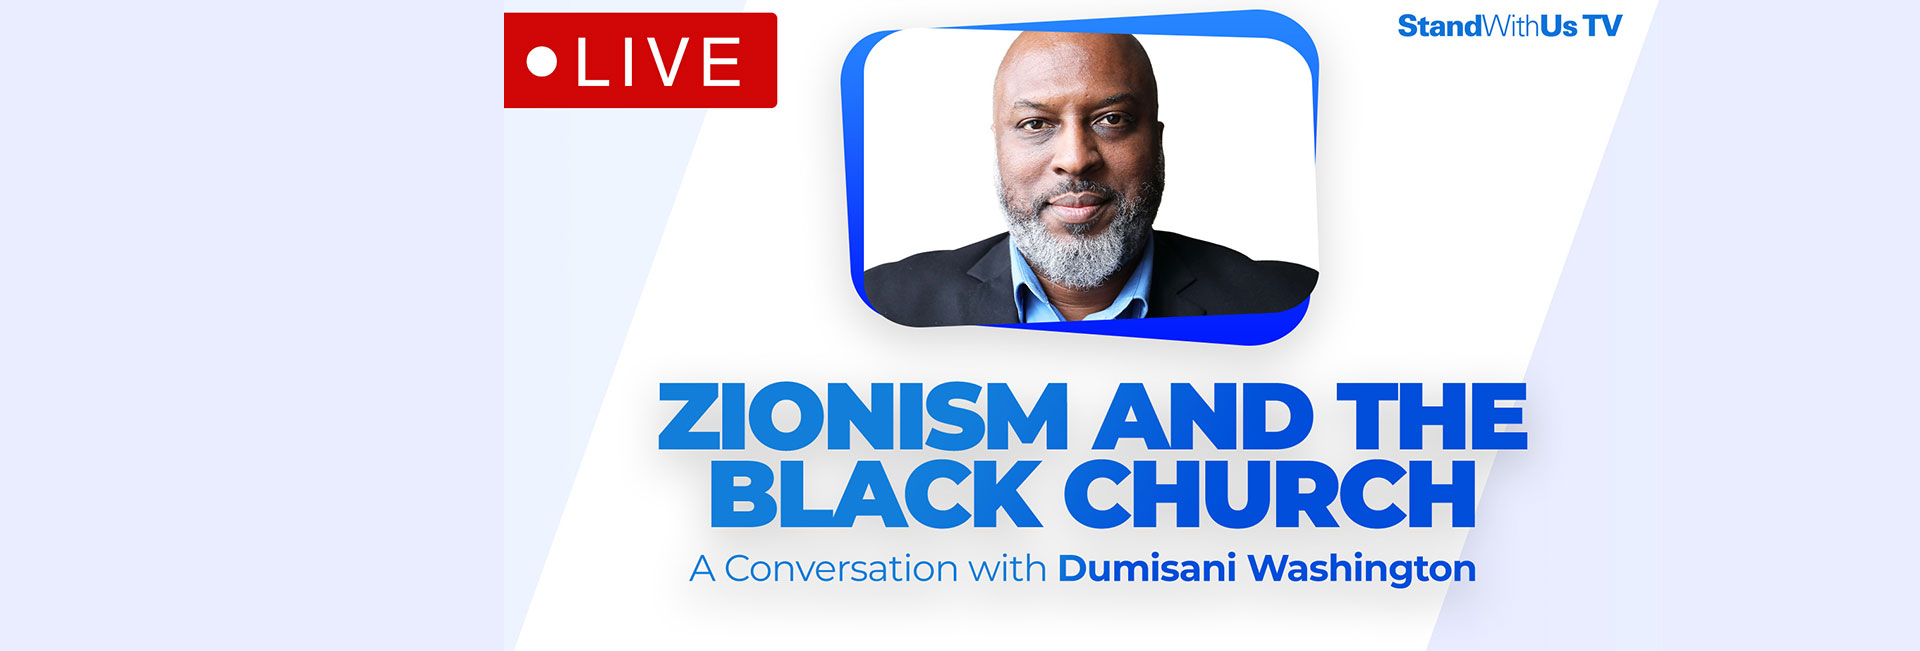 Zionism and the Black Church